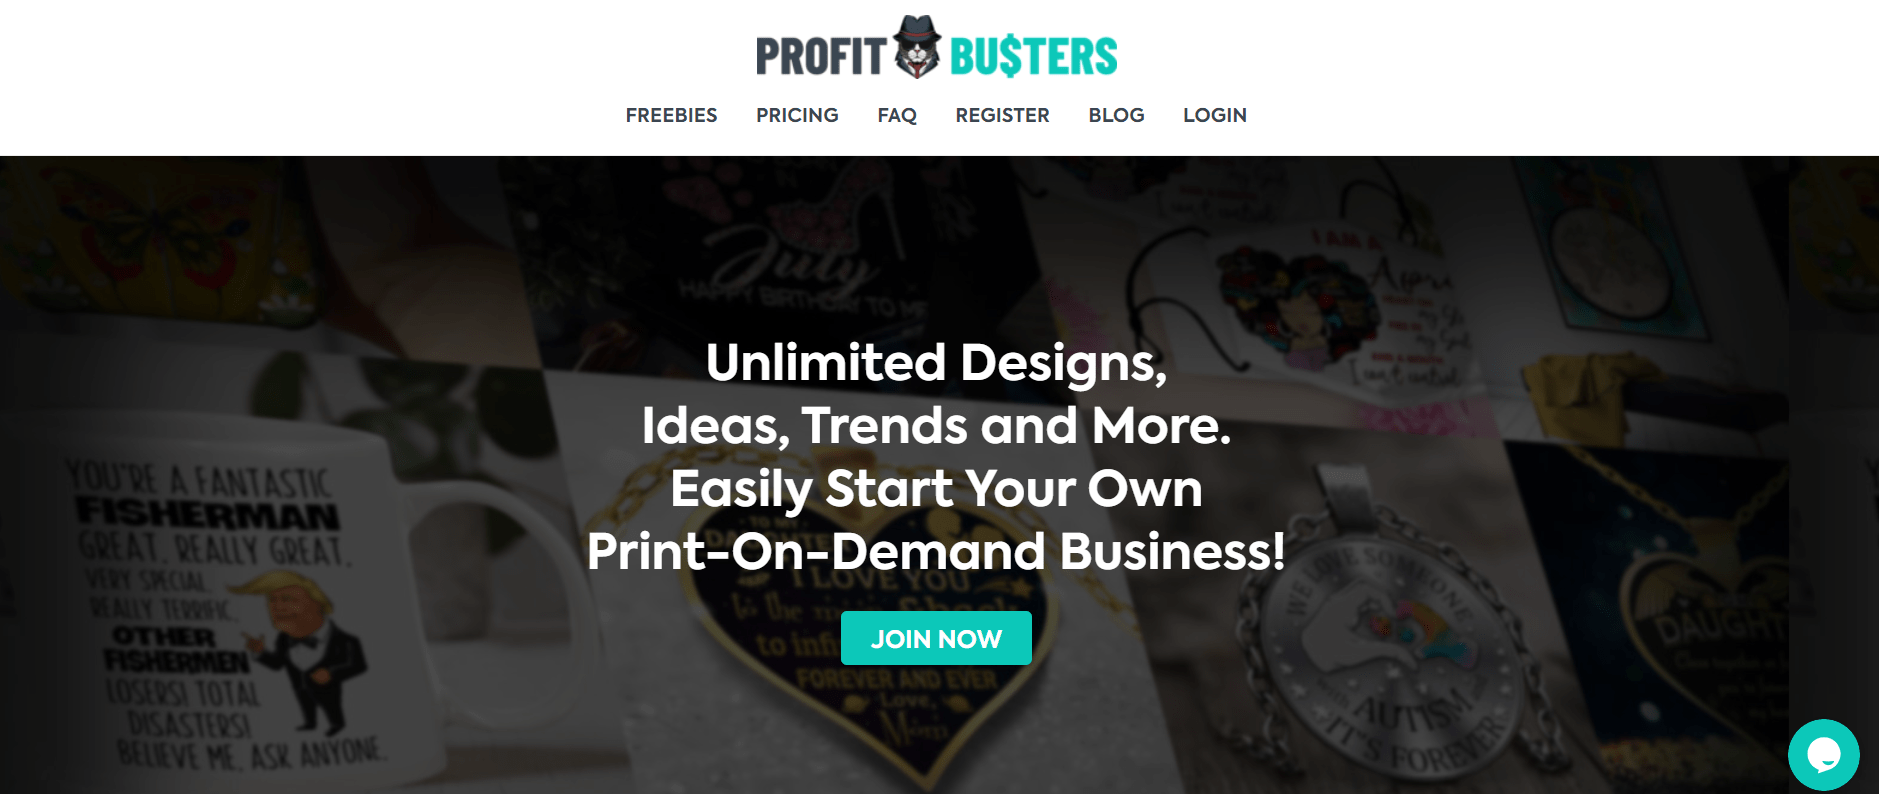 ProfitBusters Review